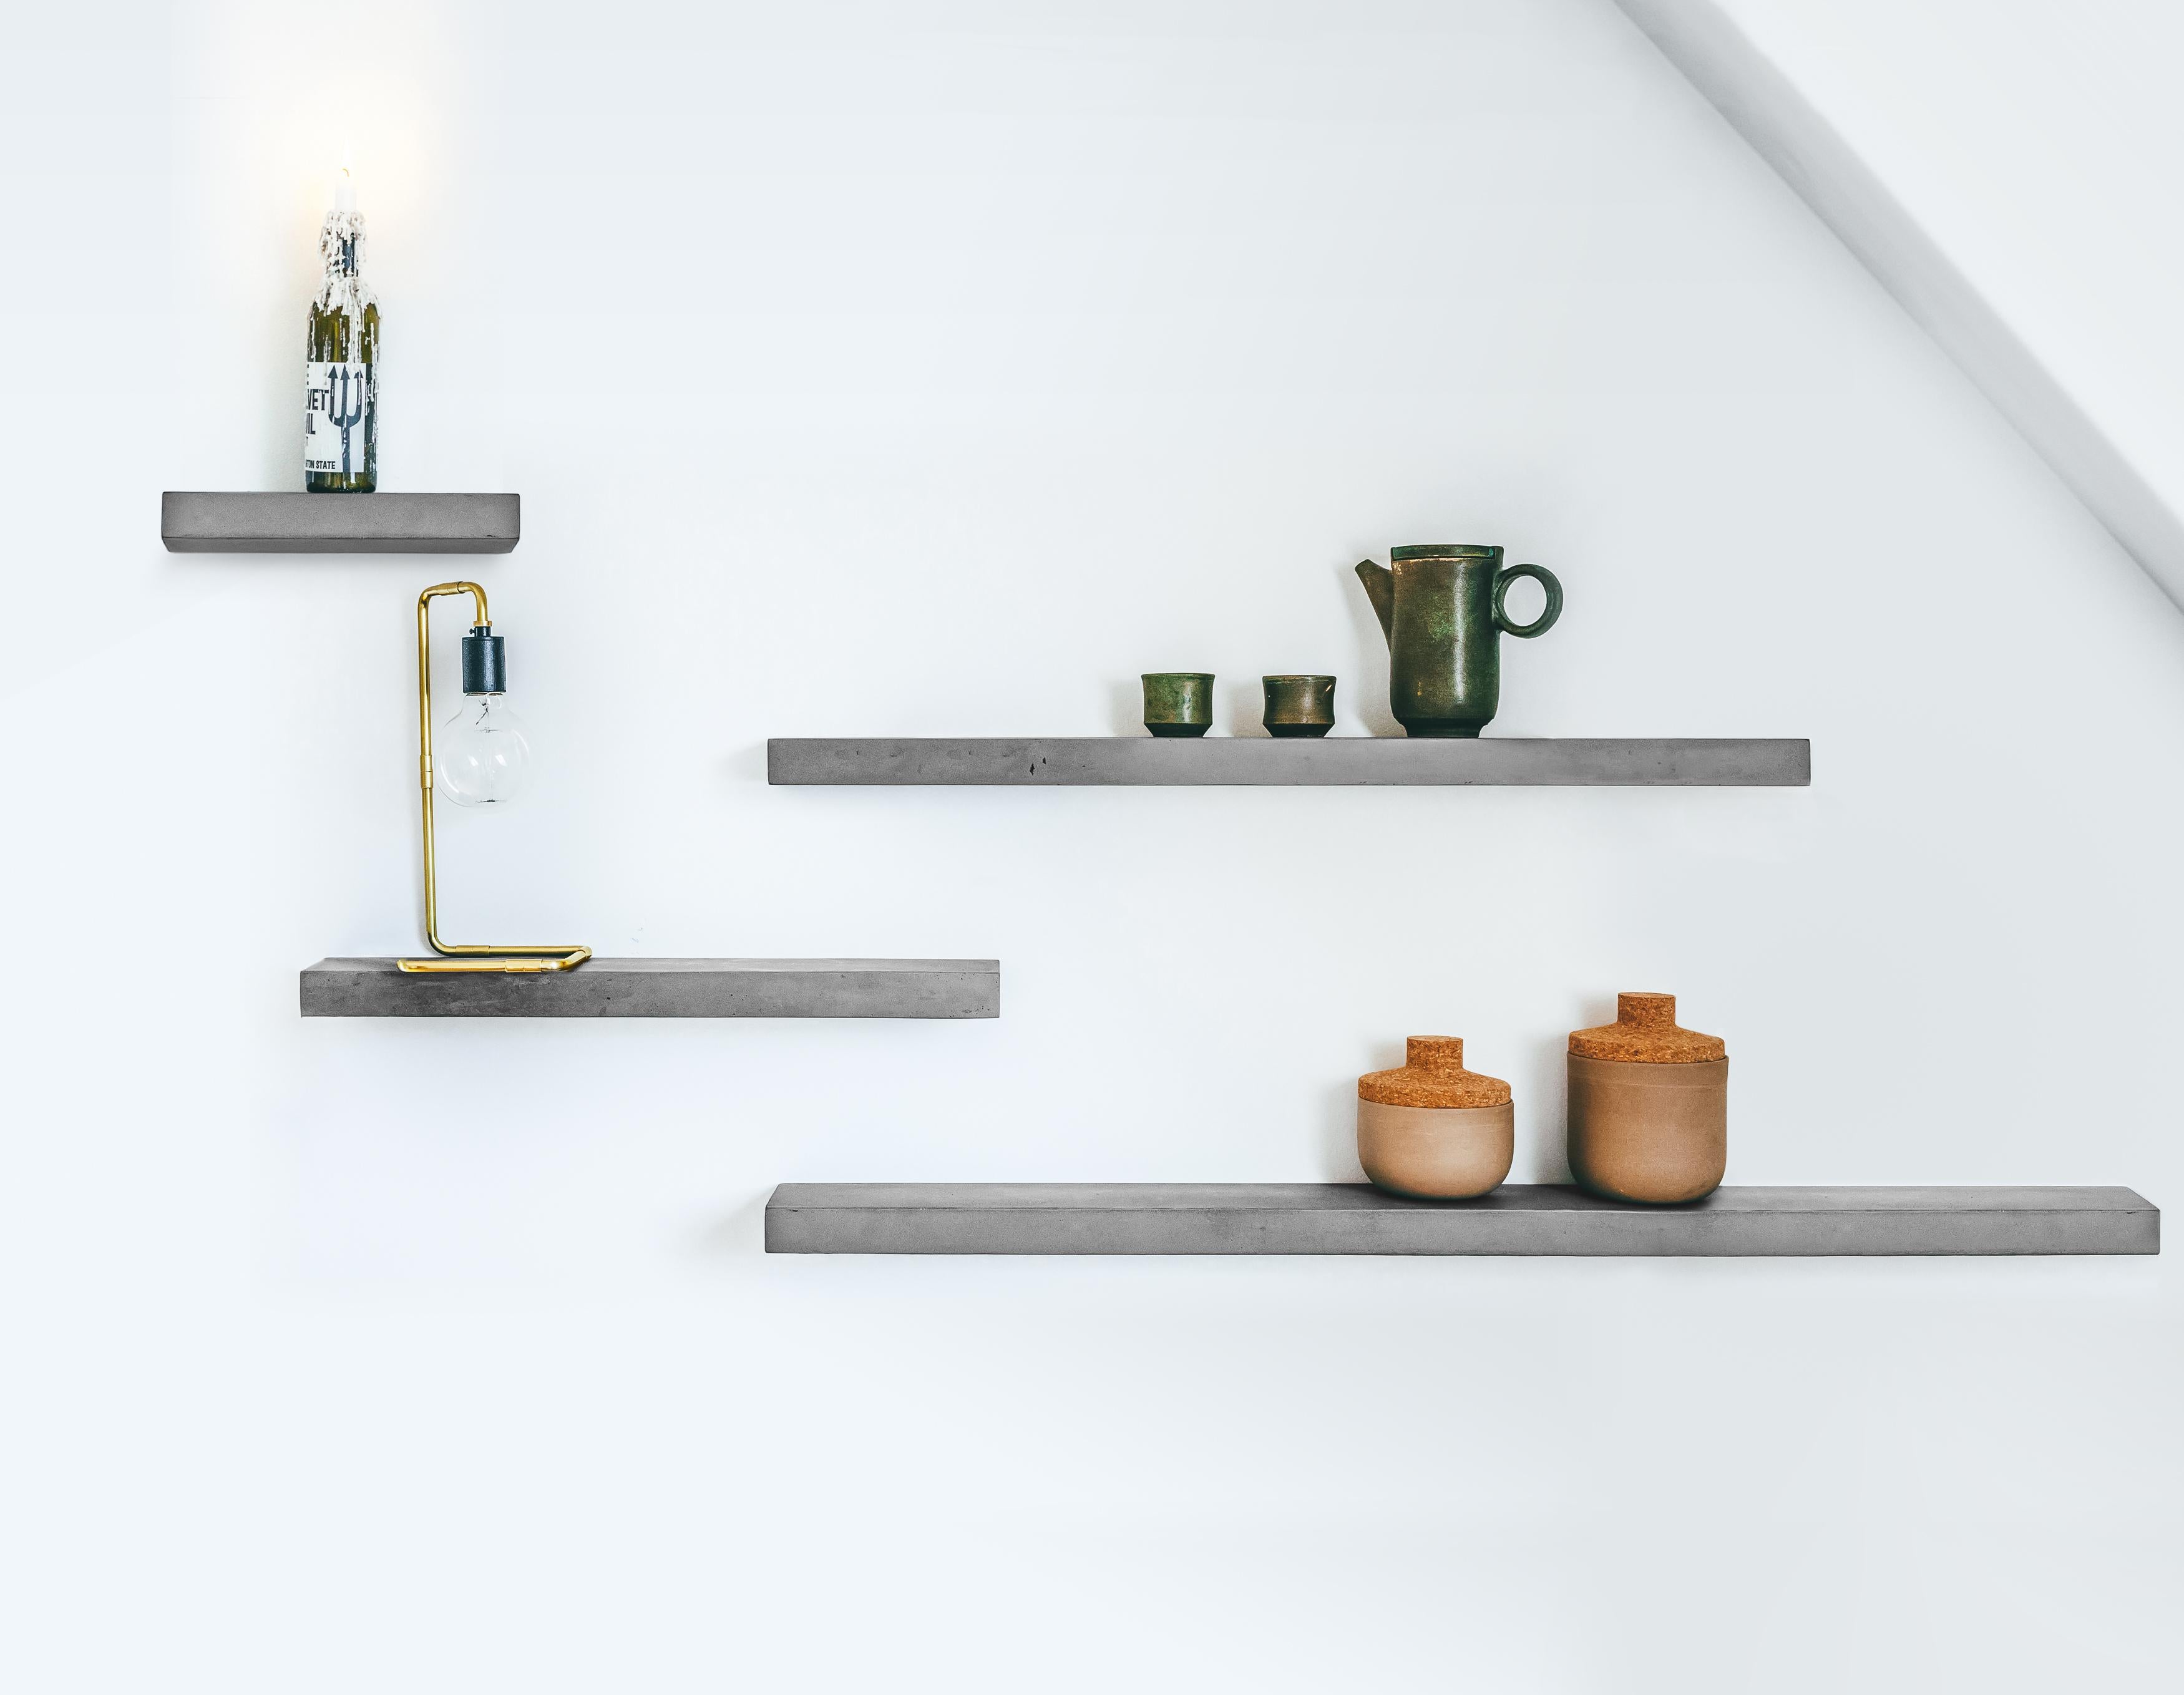 Its simple lines and the bold presence of raw concrete make this small ciment shelf great to highlight what inspires you: frame, art object, plants, vase.

Some will use it as an extra shelf in their kitchen for spices and olive oil. It works very